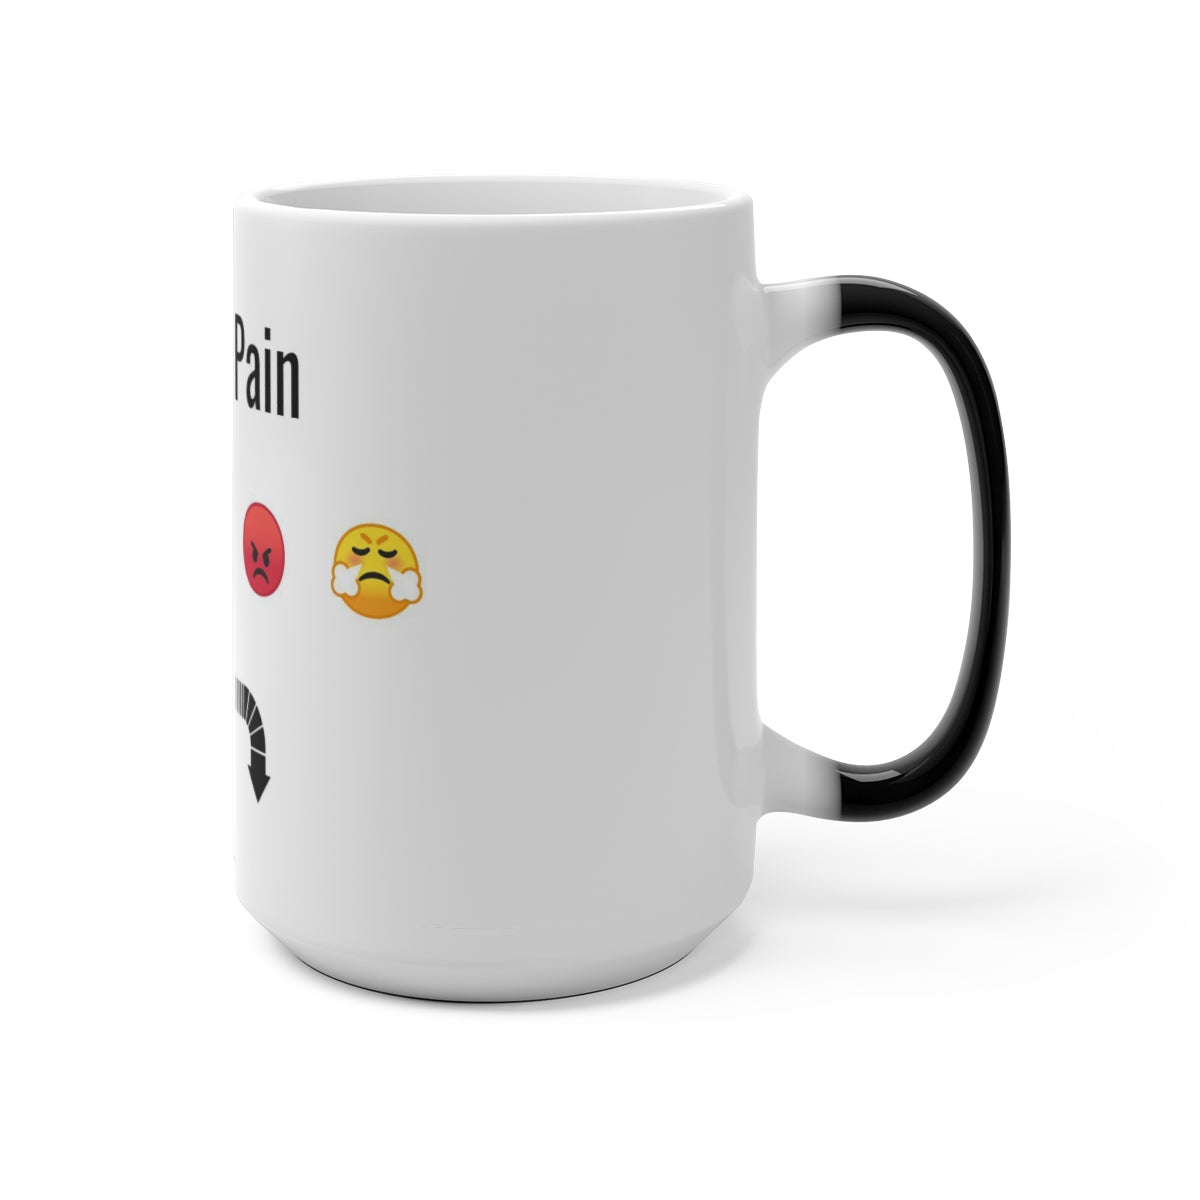 Five Toes Down Pain Color Changing Mug